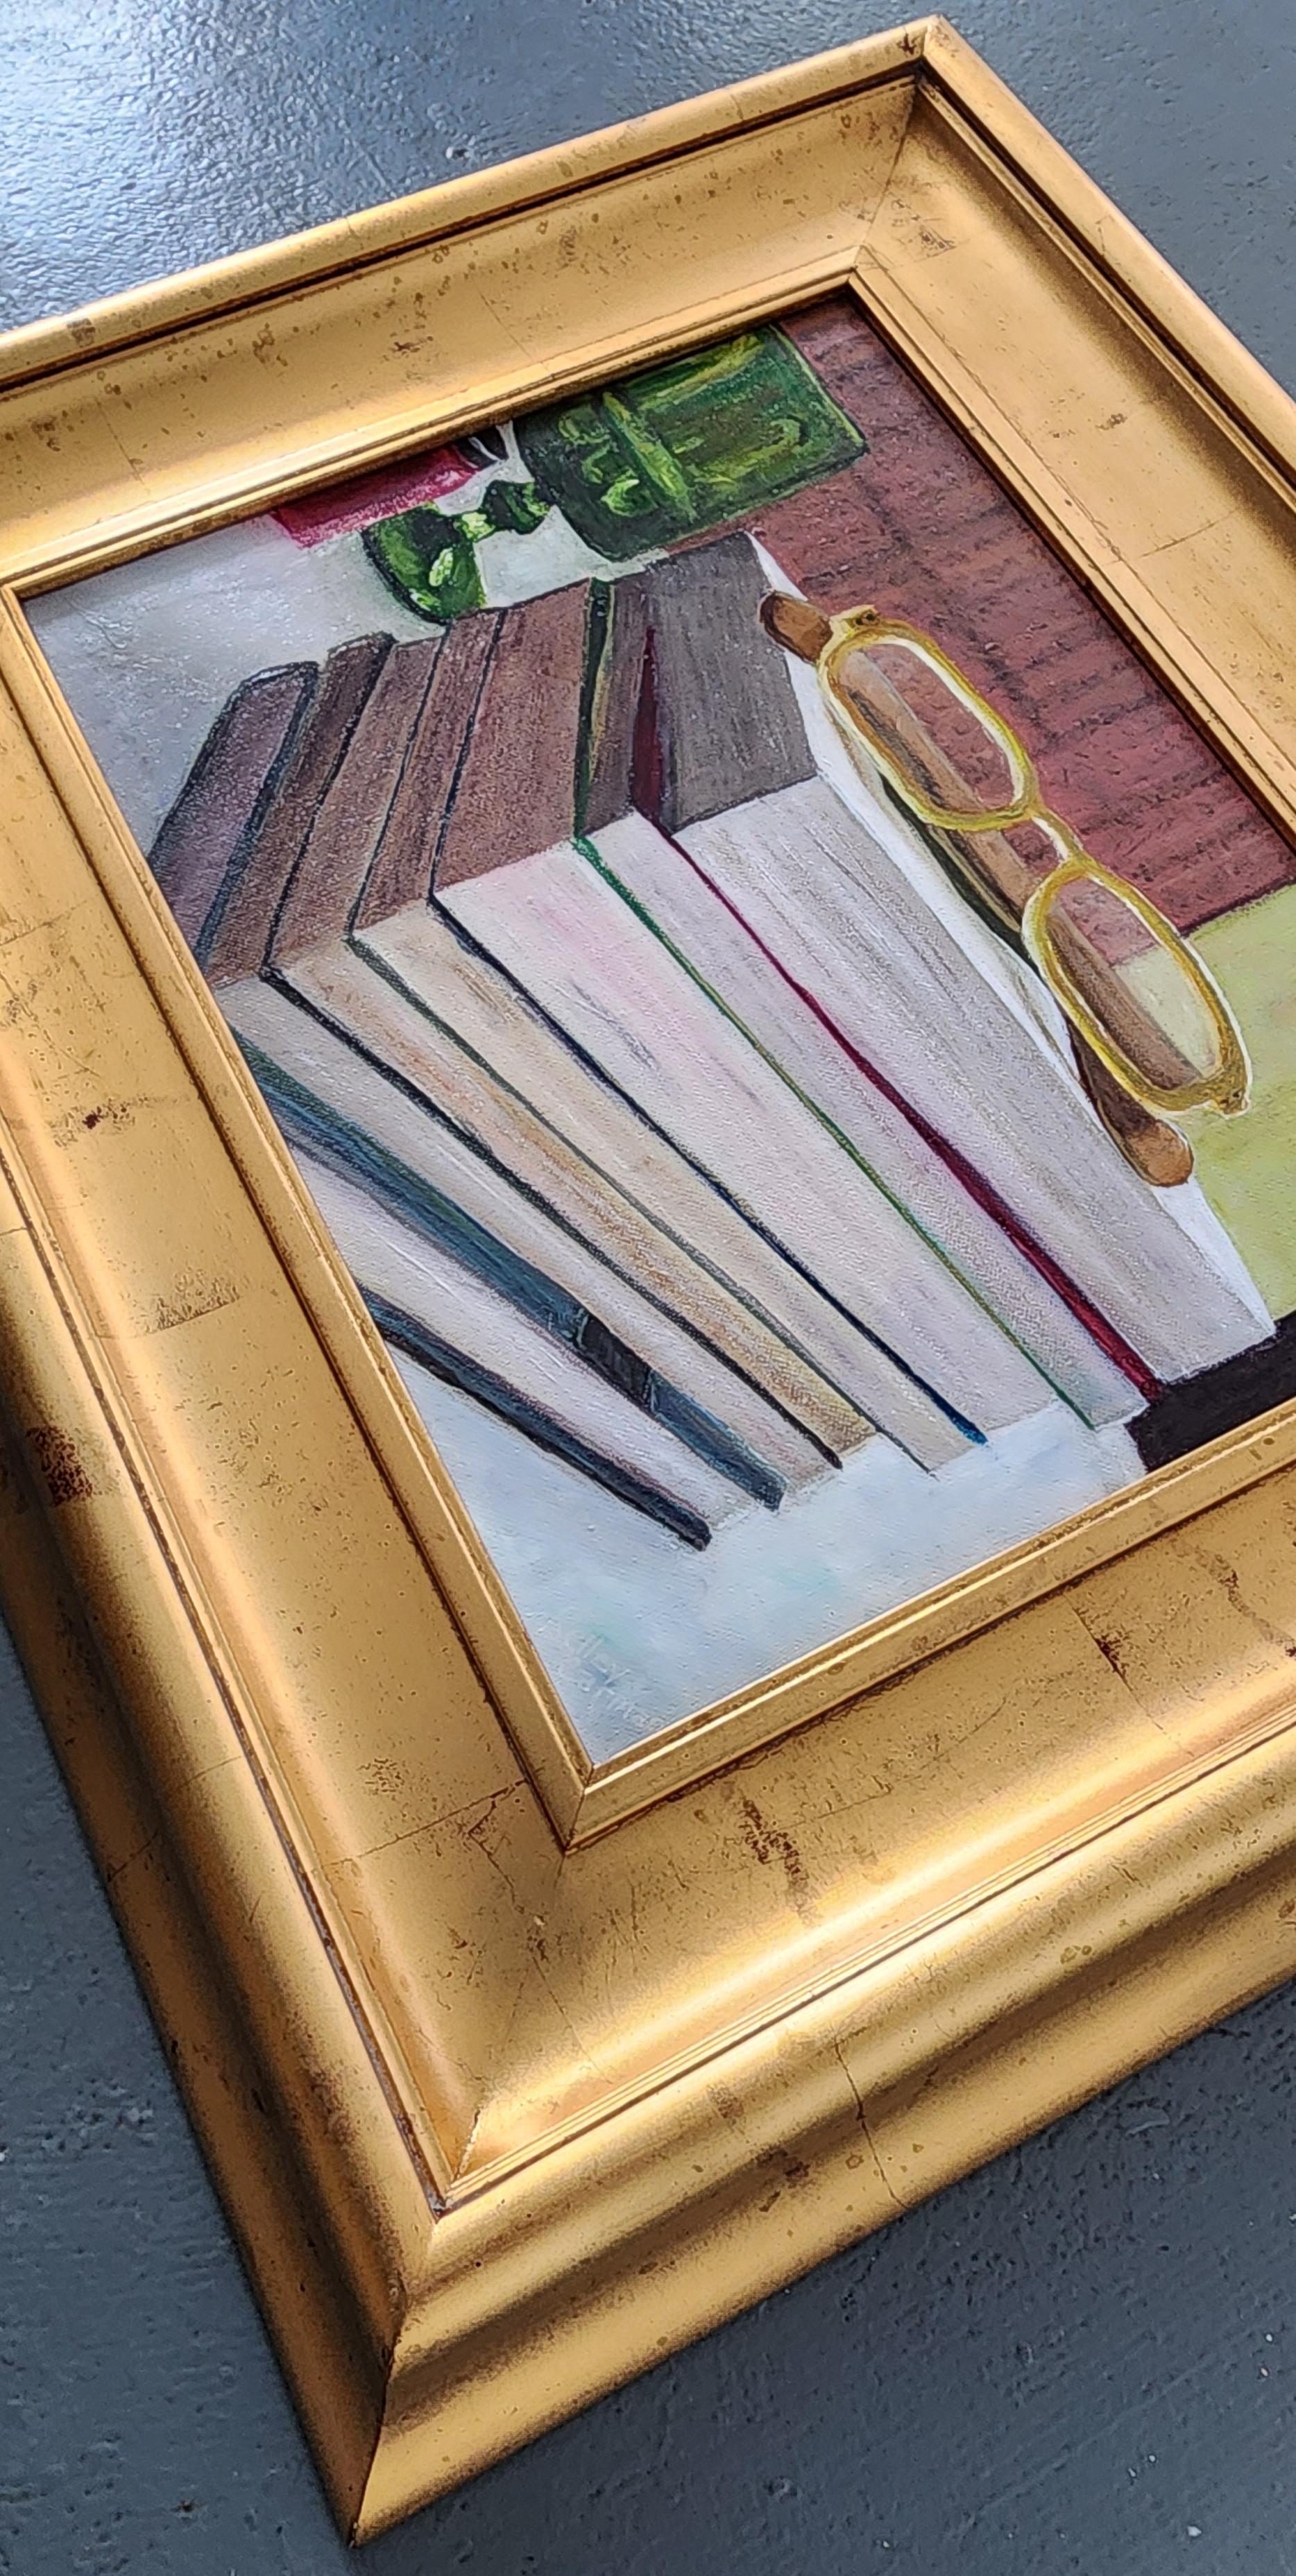 Backlog (Still Life, Books, Reading, Hobby, Warm, ~47% OFF LIST PRICE) - Painting by Kelley Carman